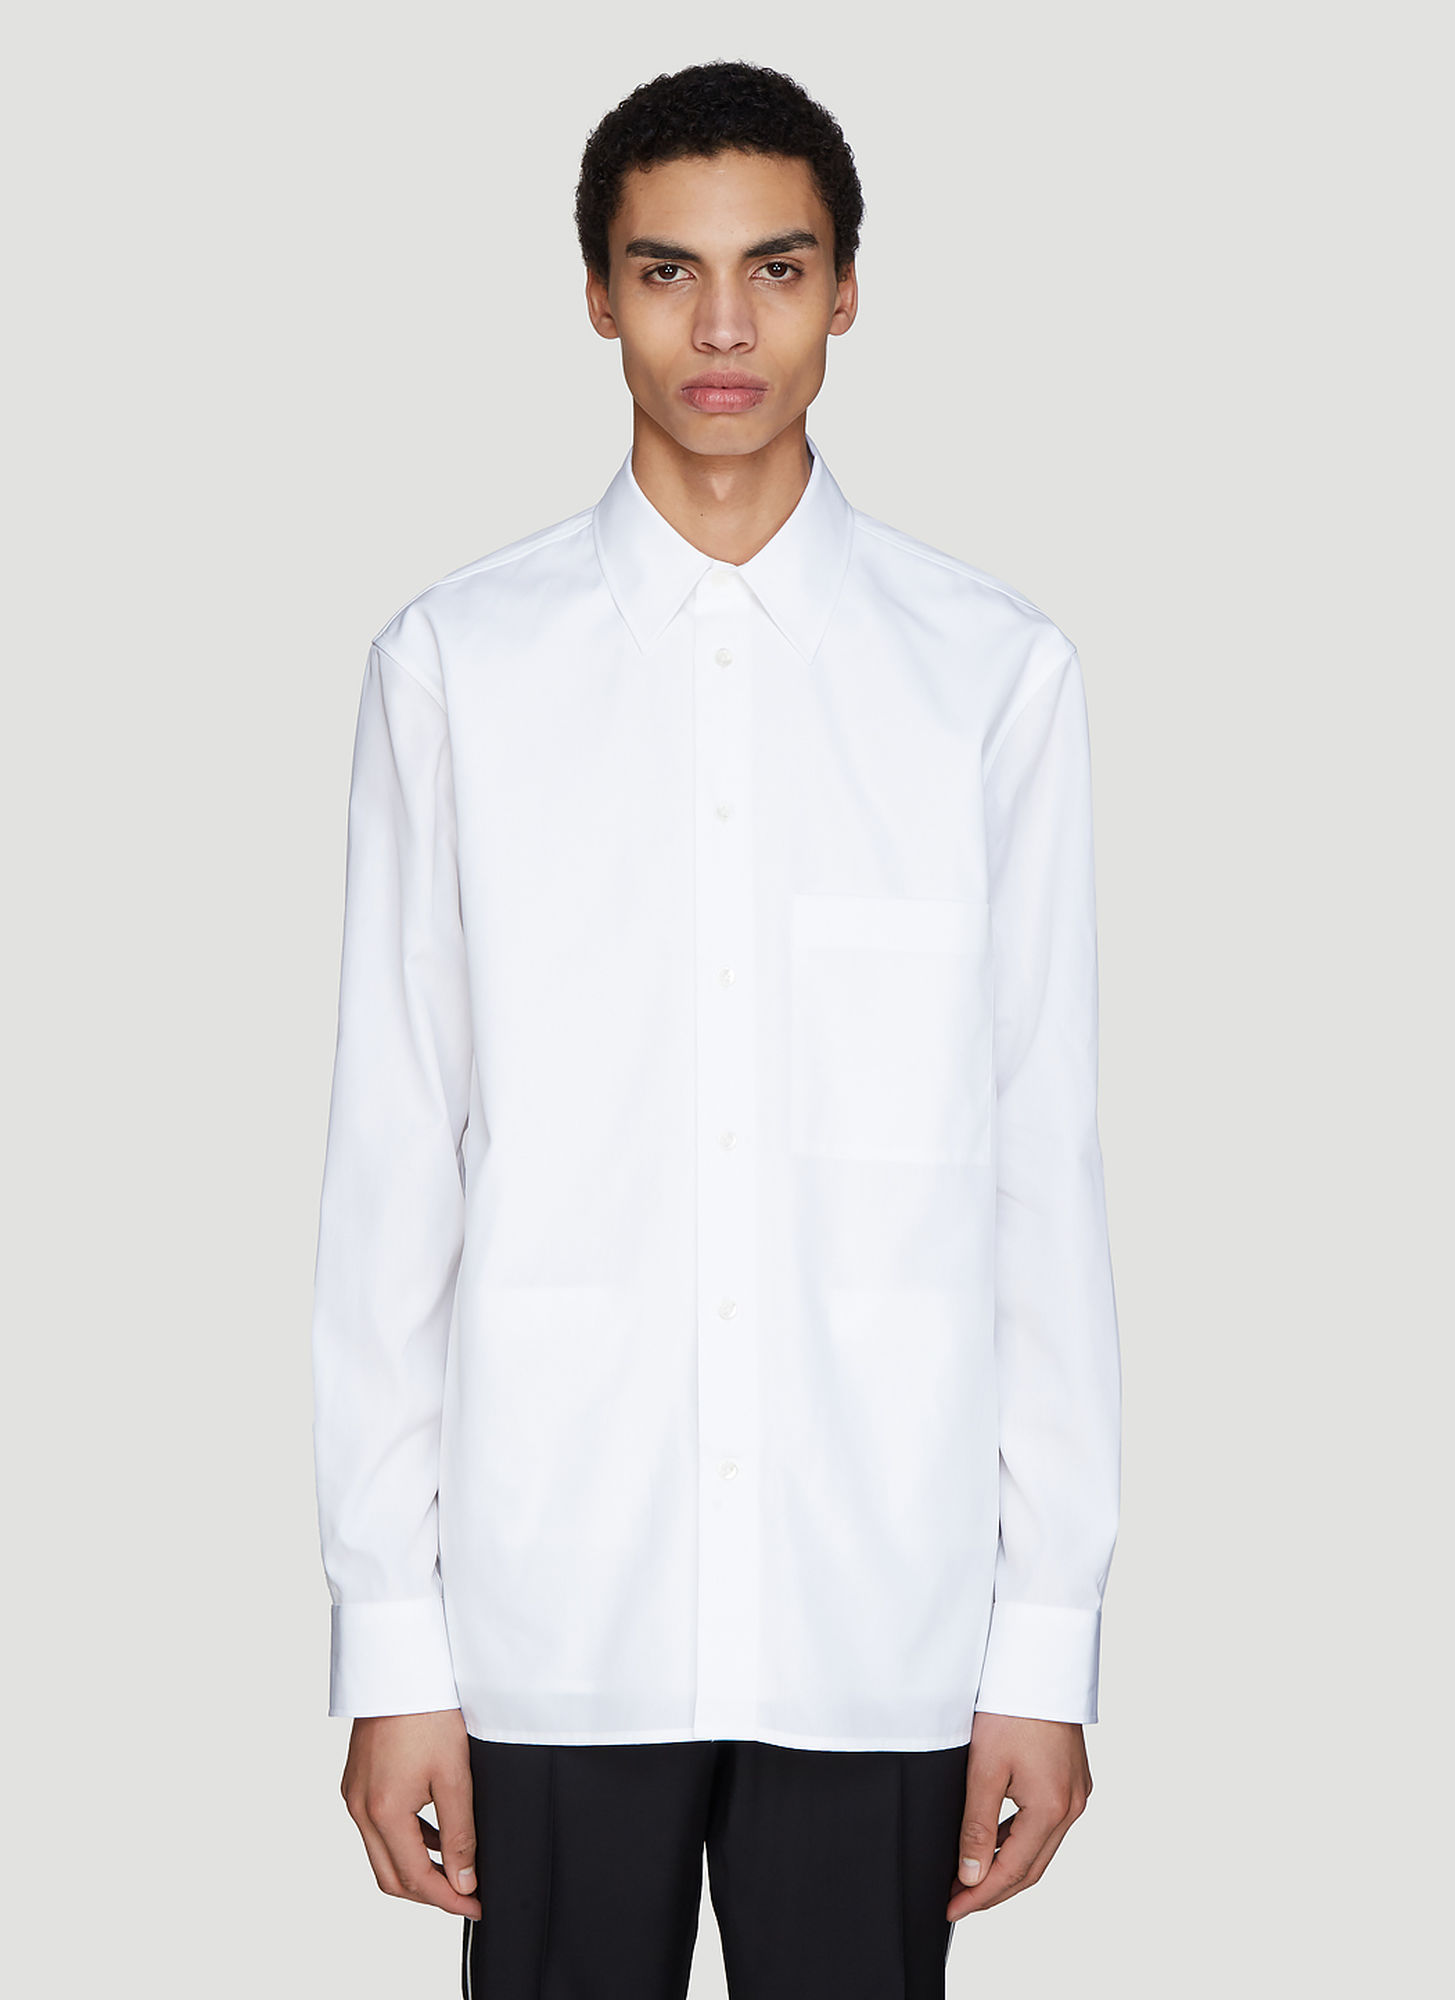 Valentino Constructed Layer Detail Shirt in White size EU – 39 | The ...